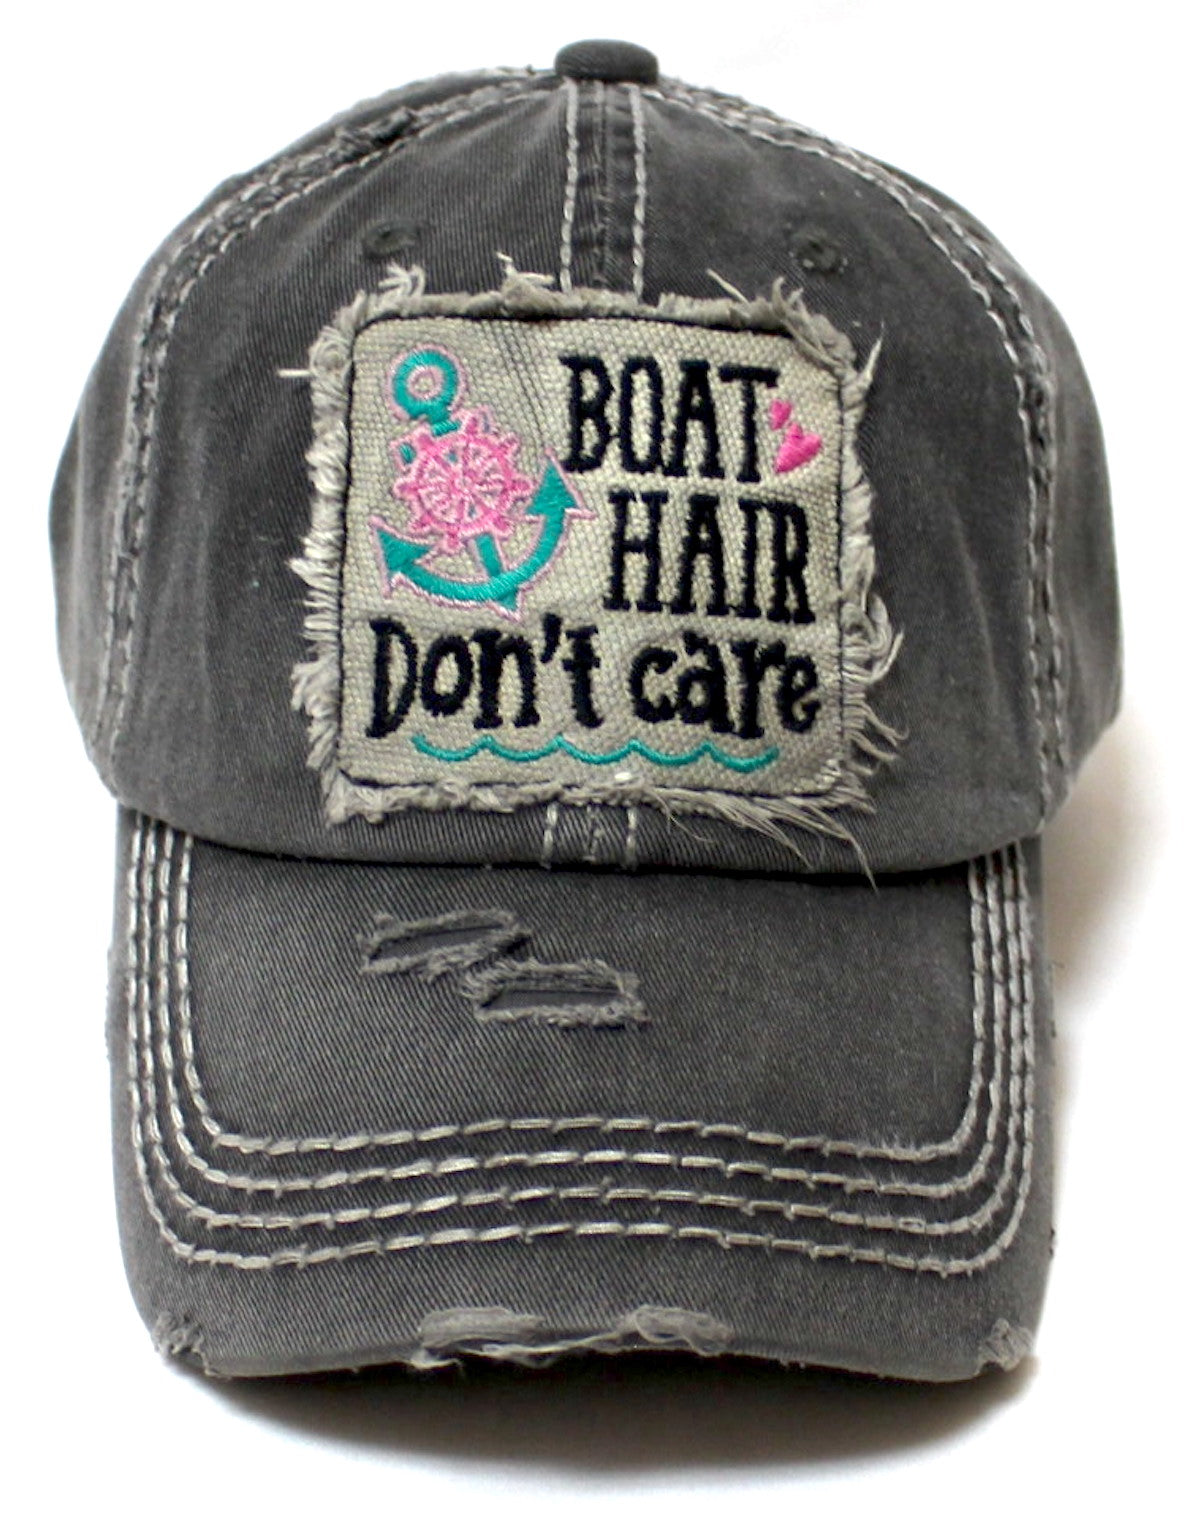 CAPS 'N VINTAGE Women's Ballcap Boat Hair Don't Care Patch Embroidery Hat